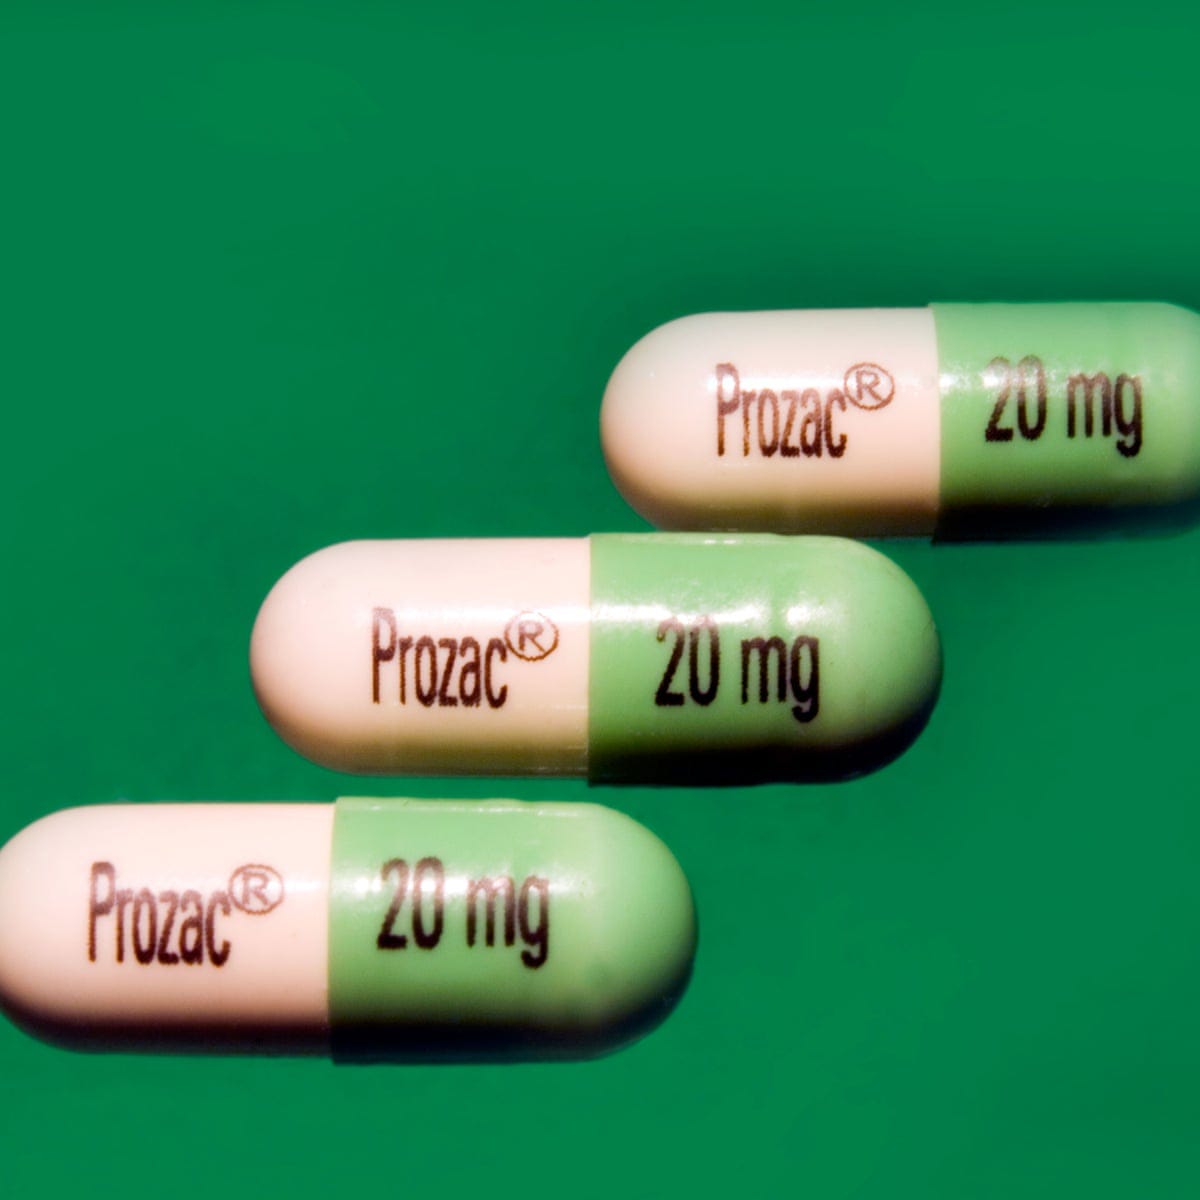 Young people on antidepressants more prone to violence, study finds | World  news | The Guardian